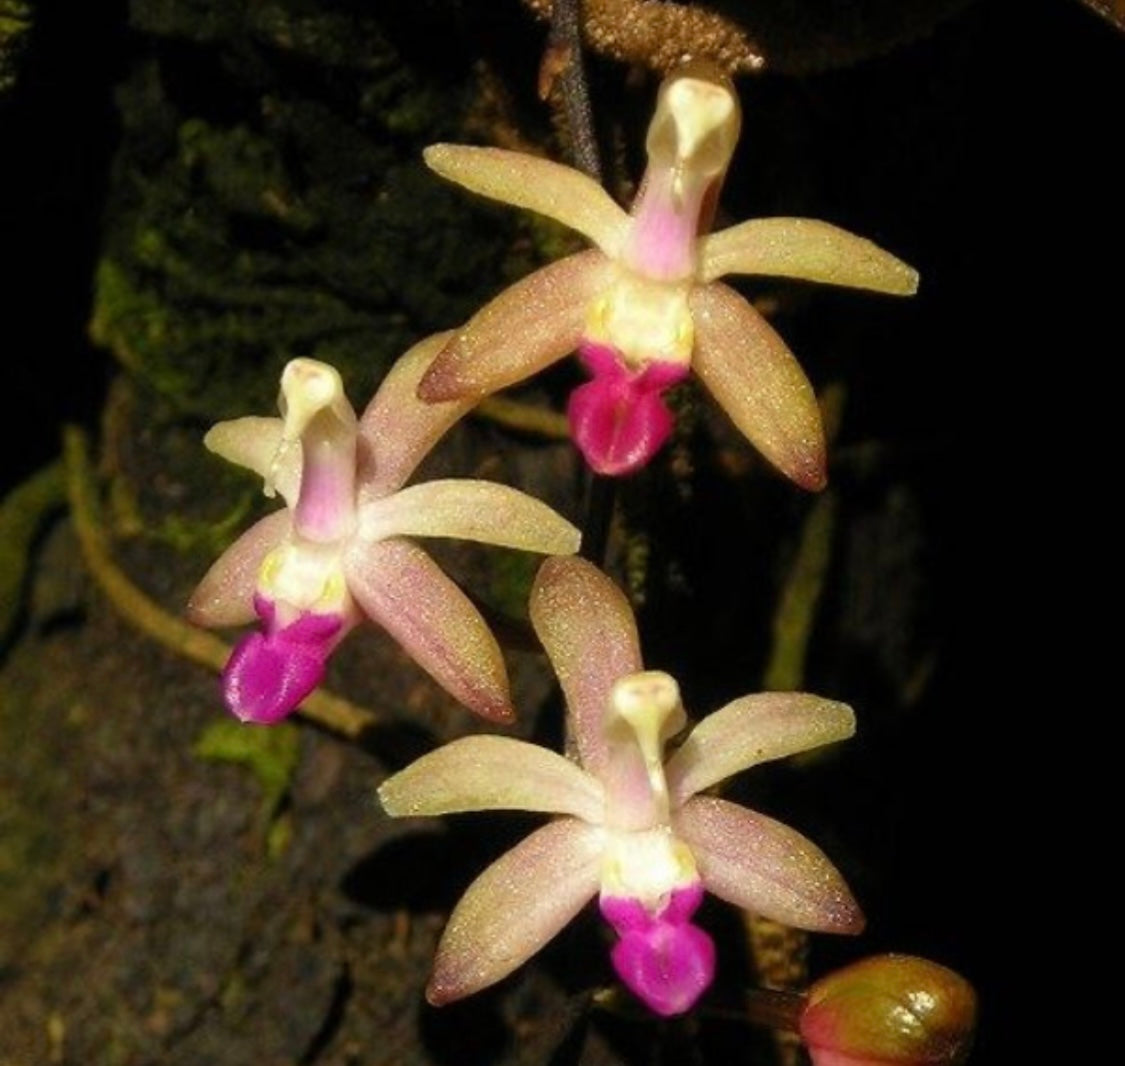 Stereochilus pachyphyllus